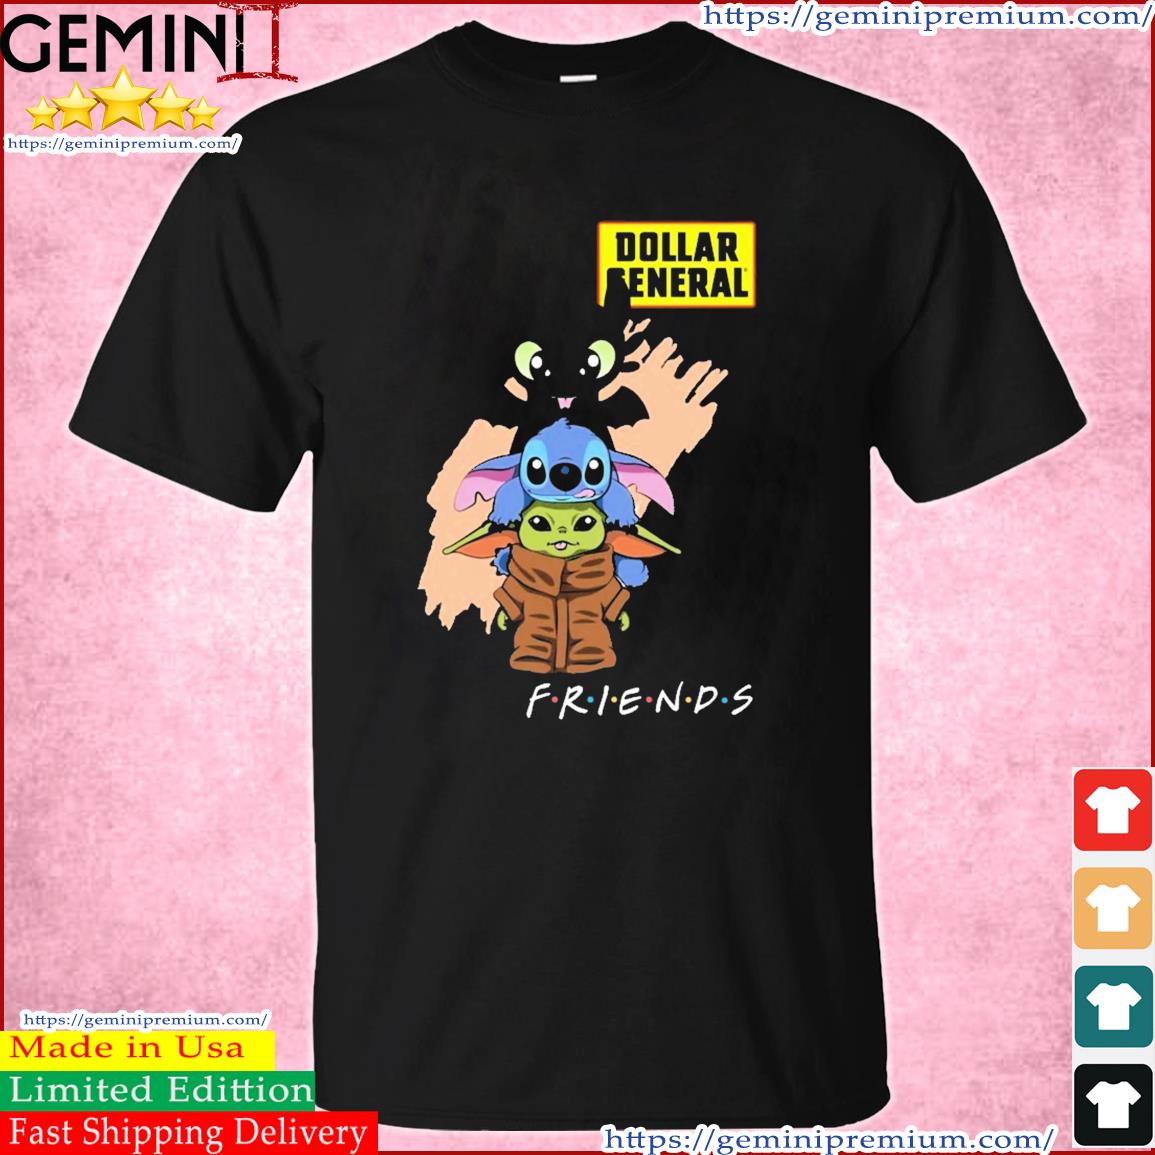 Friends Baby Yoda, Baby Stitch And Toothless Dollar General Shirt